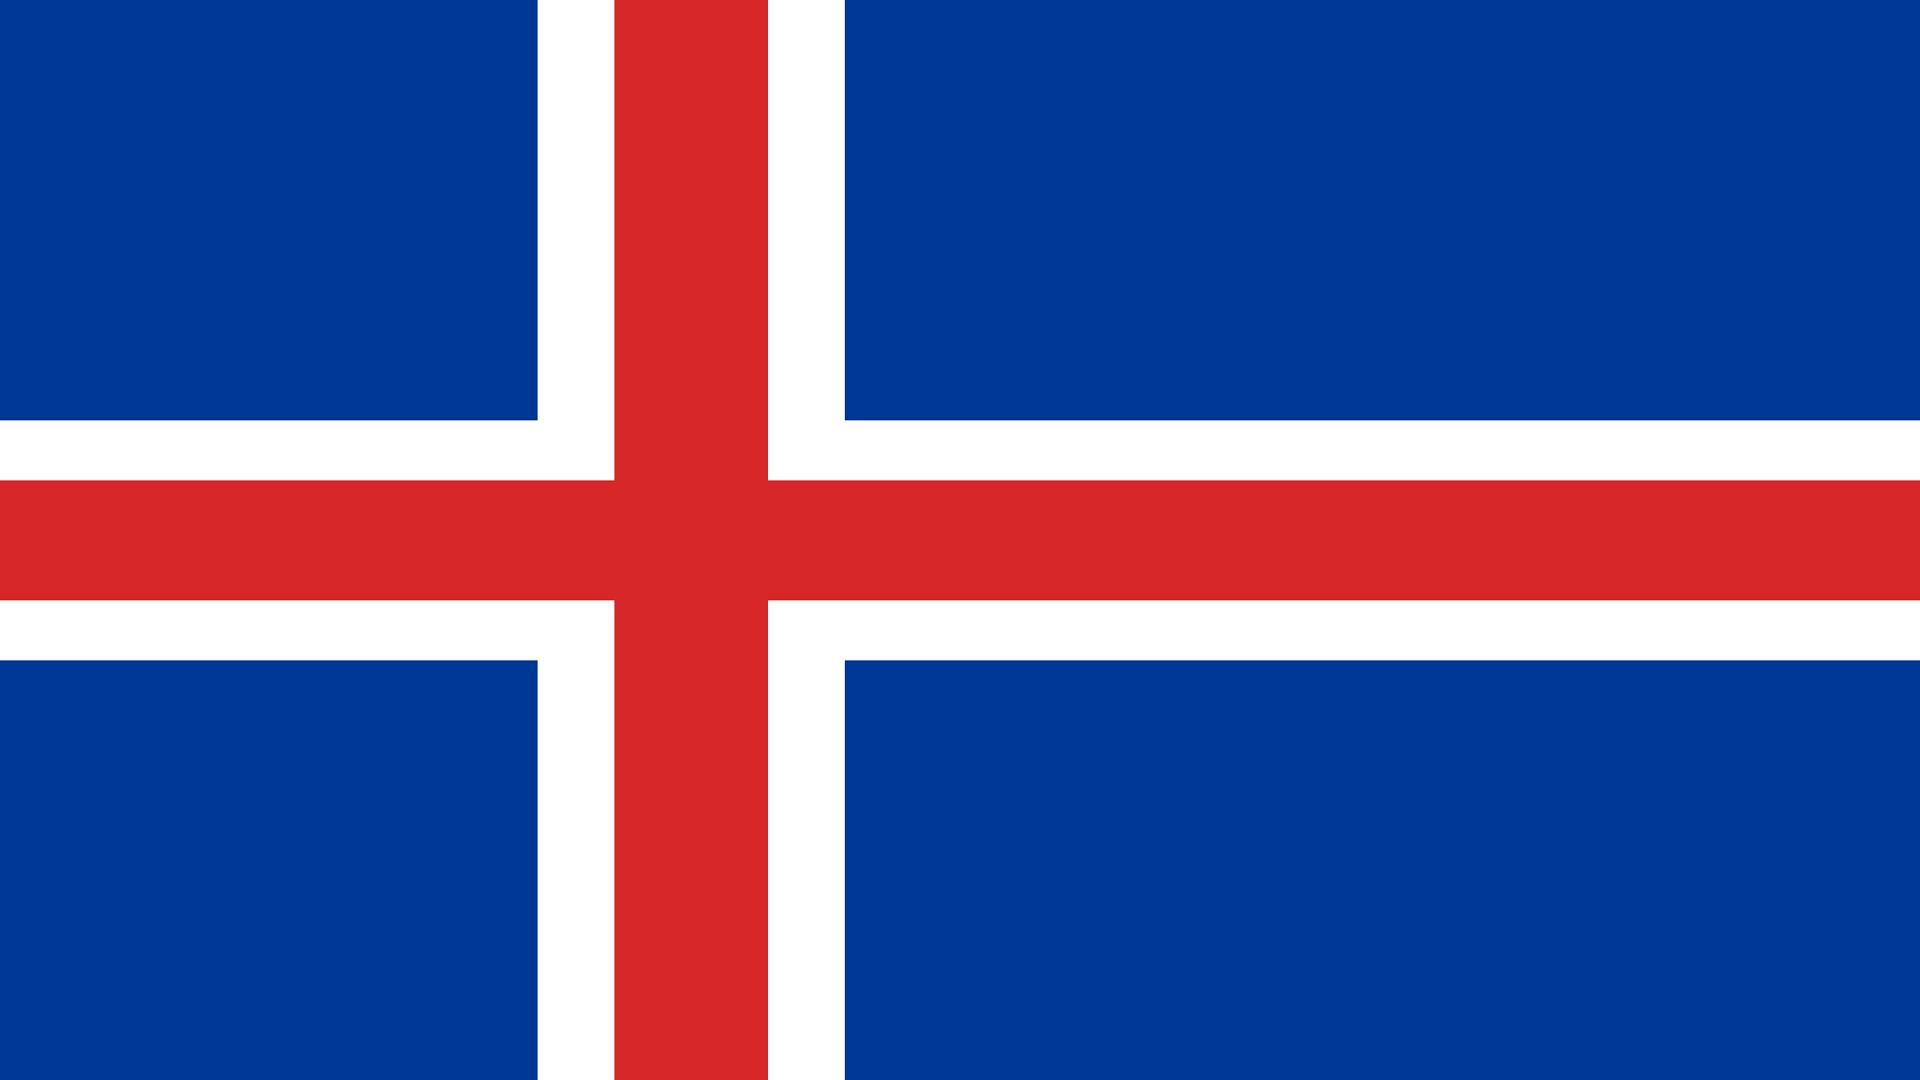 Iceland Flag, High Definition, High Quality, Widescreen